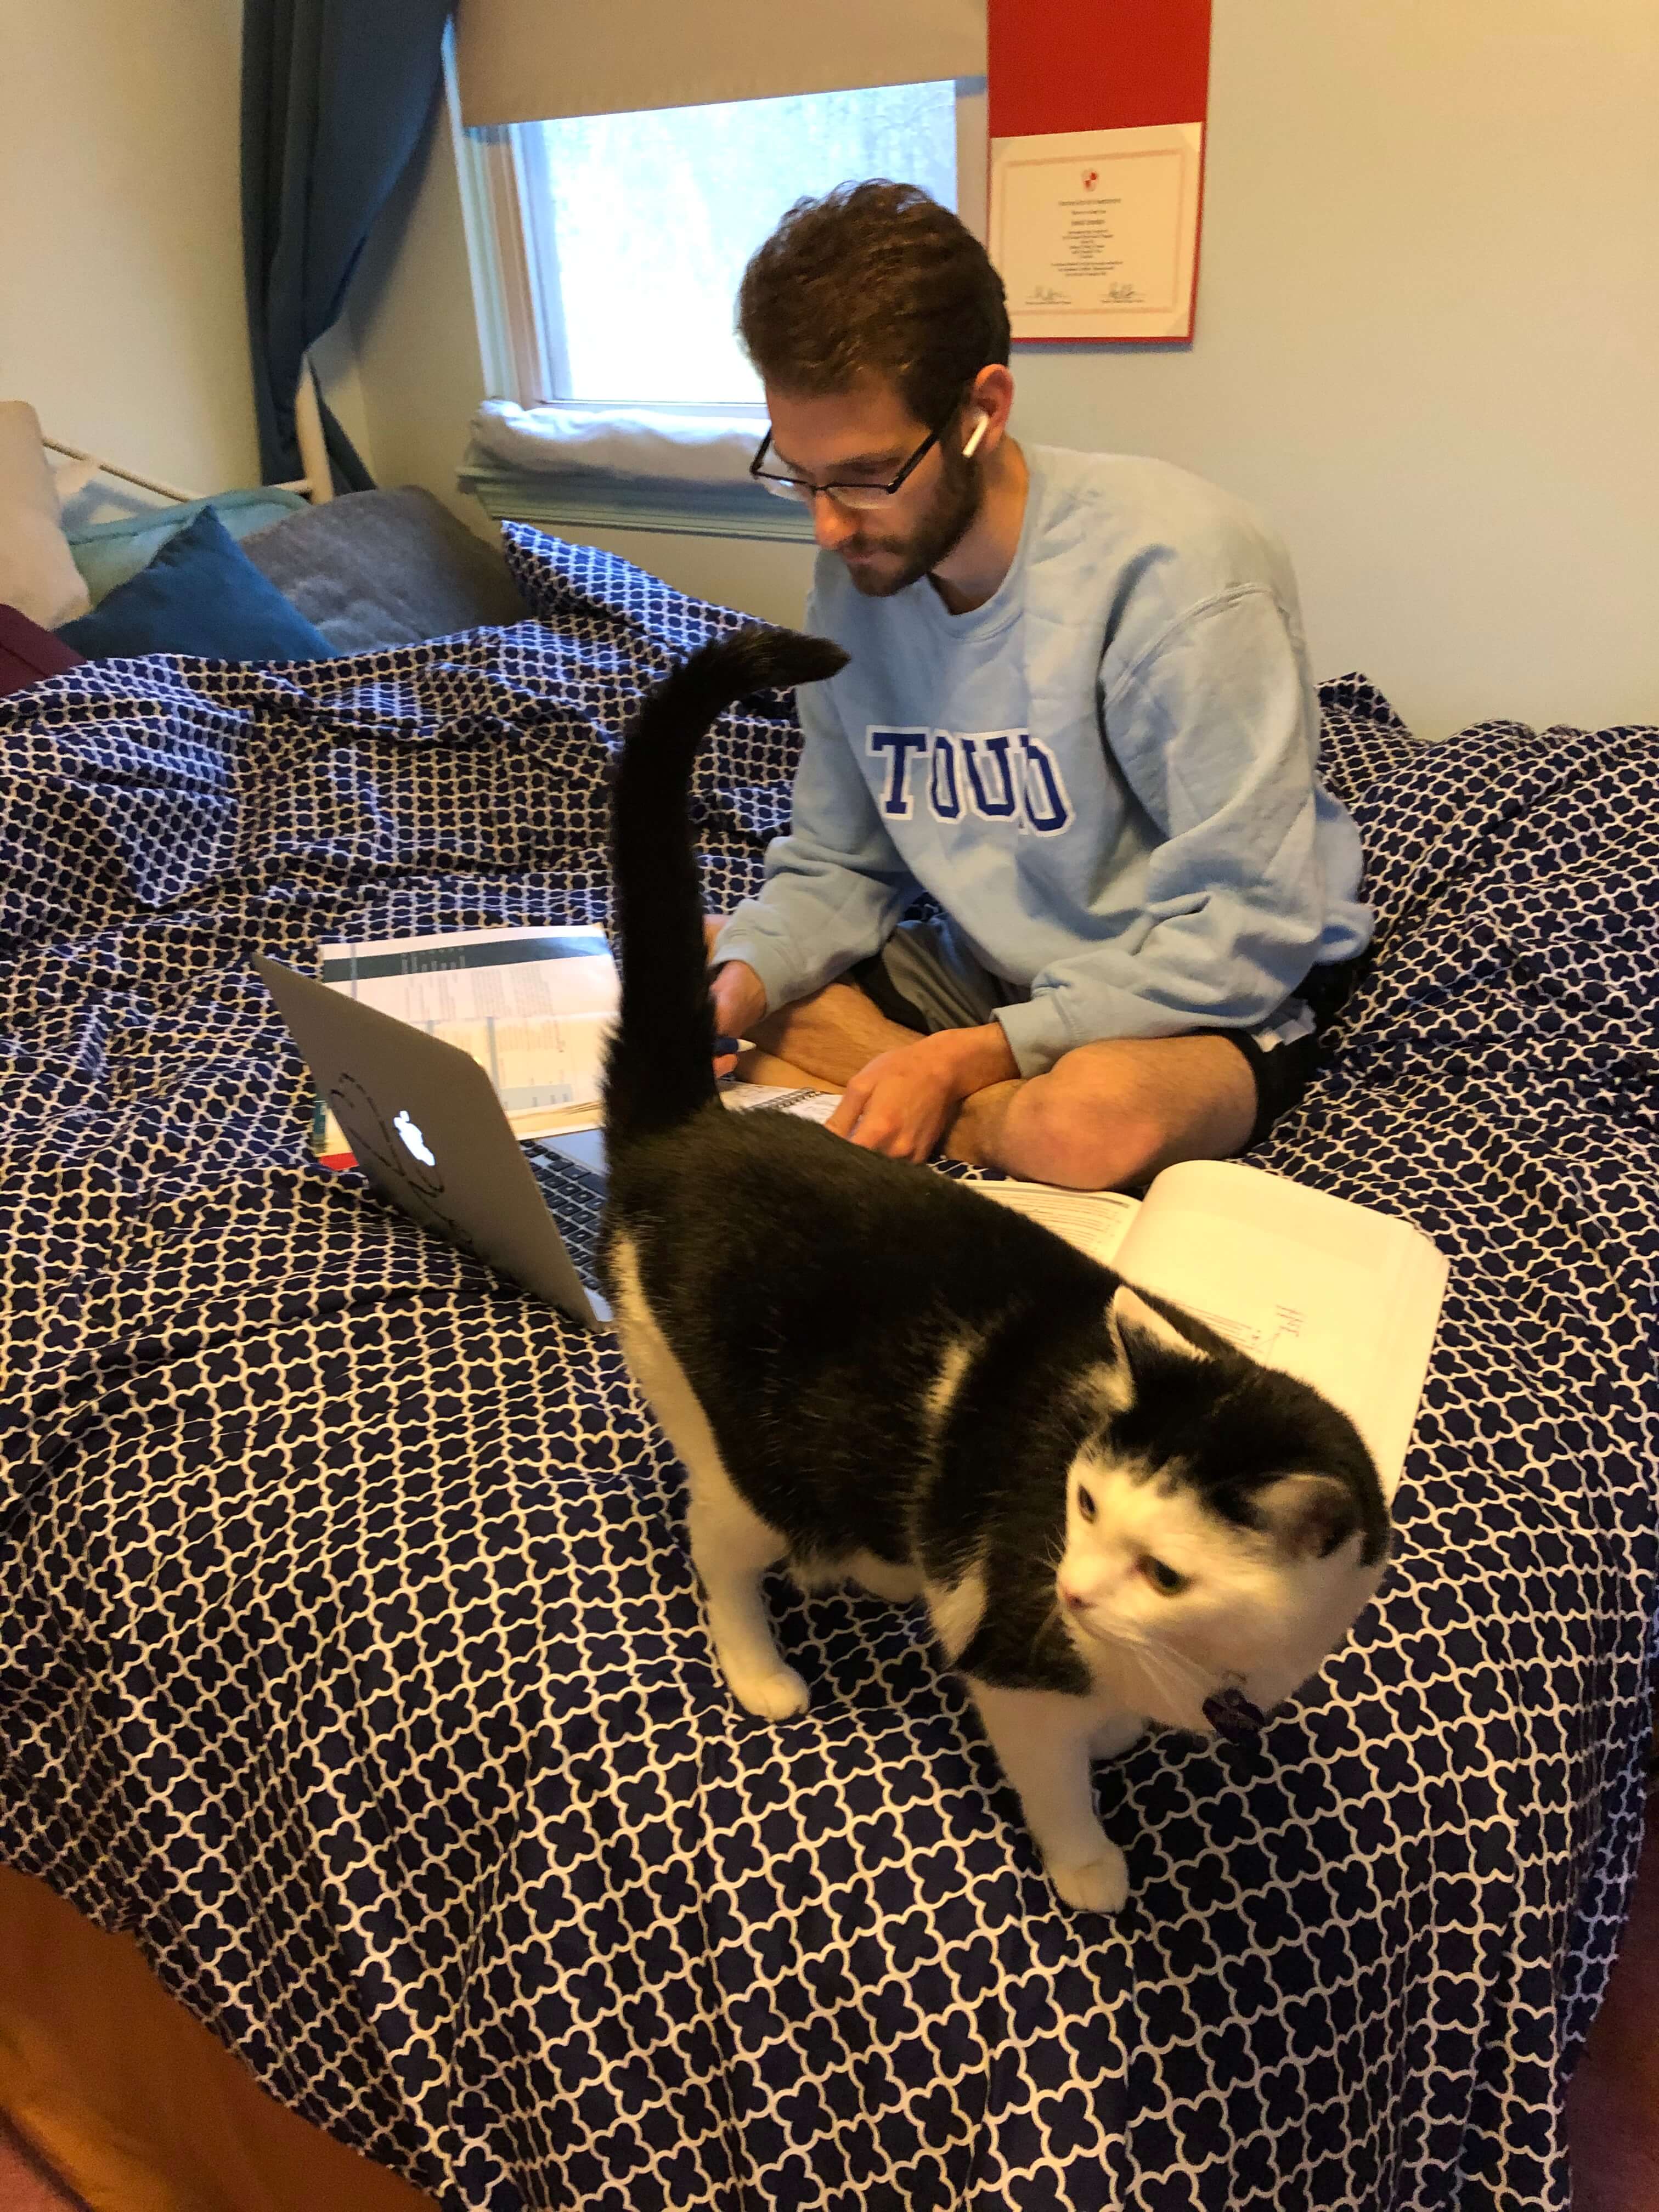 Adam Halpern, OMS II, studying with Hilly the cat in Pennsylvania while school is closed for “Stay-at-Home” in New York